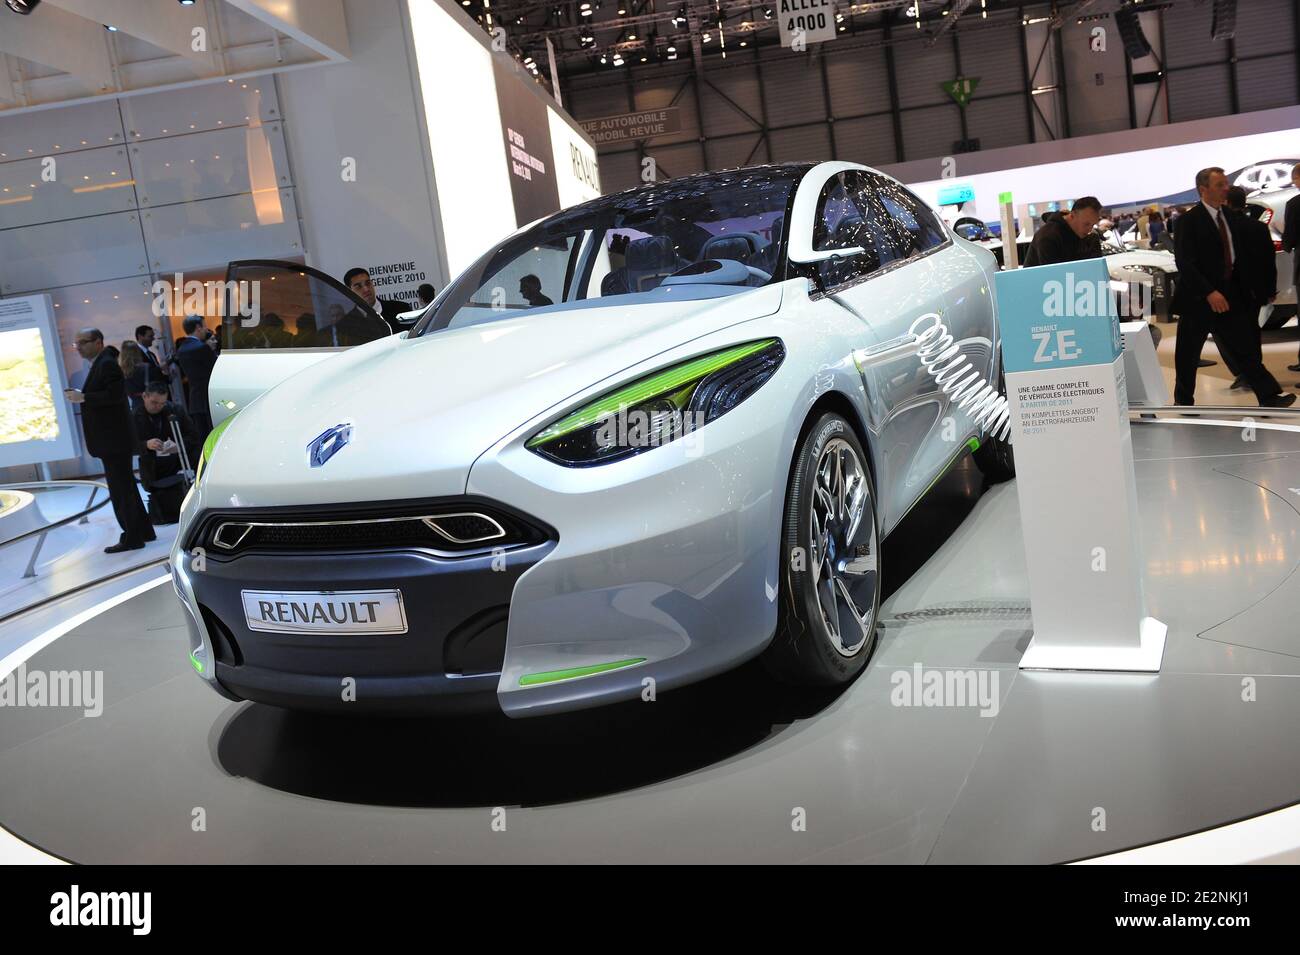 The Concept Car Renault Fluence Zeconcept is on display during the 80th International Motor Show in Geneva, Switzerland on March 2, 2010. Photo by Loona/ABACAPRESS.COM Stock Photo